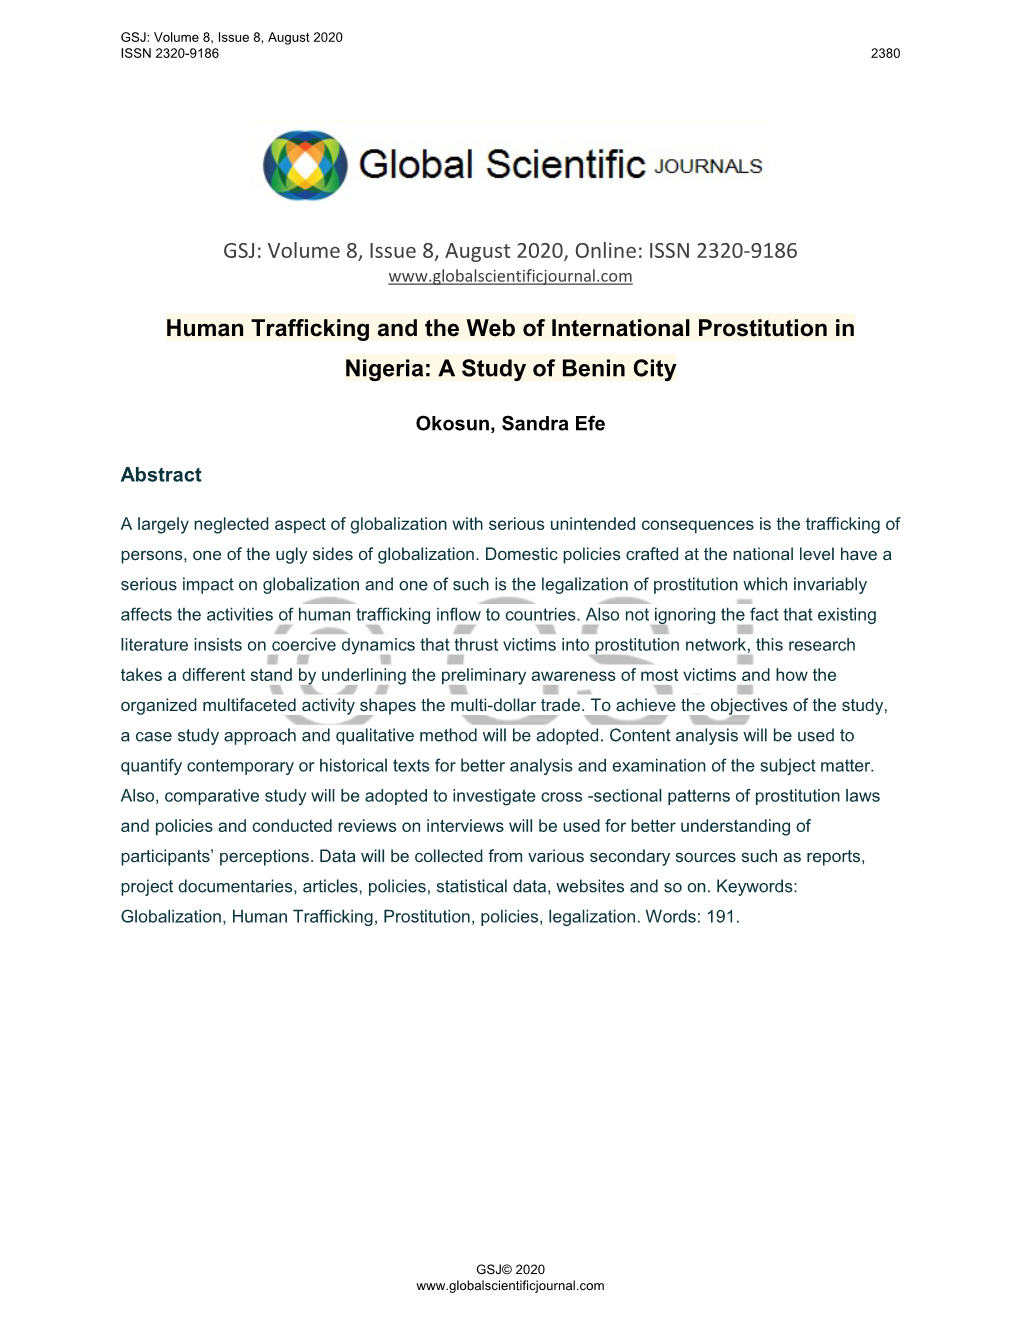 ISSN 2320-9186 Human Trafficking and the Web of International